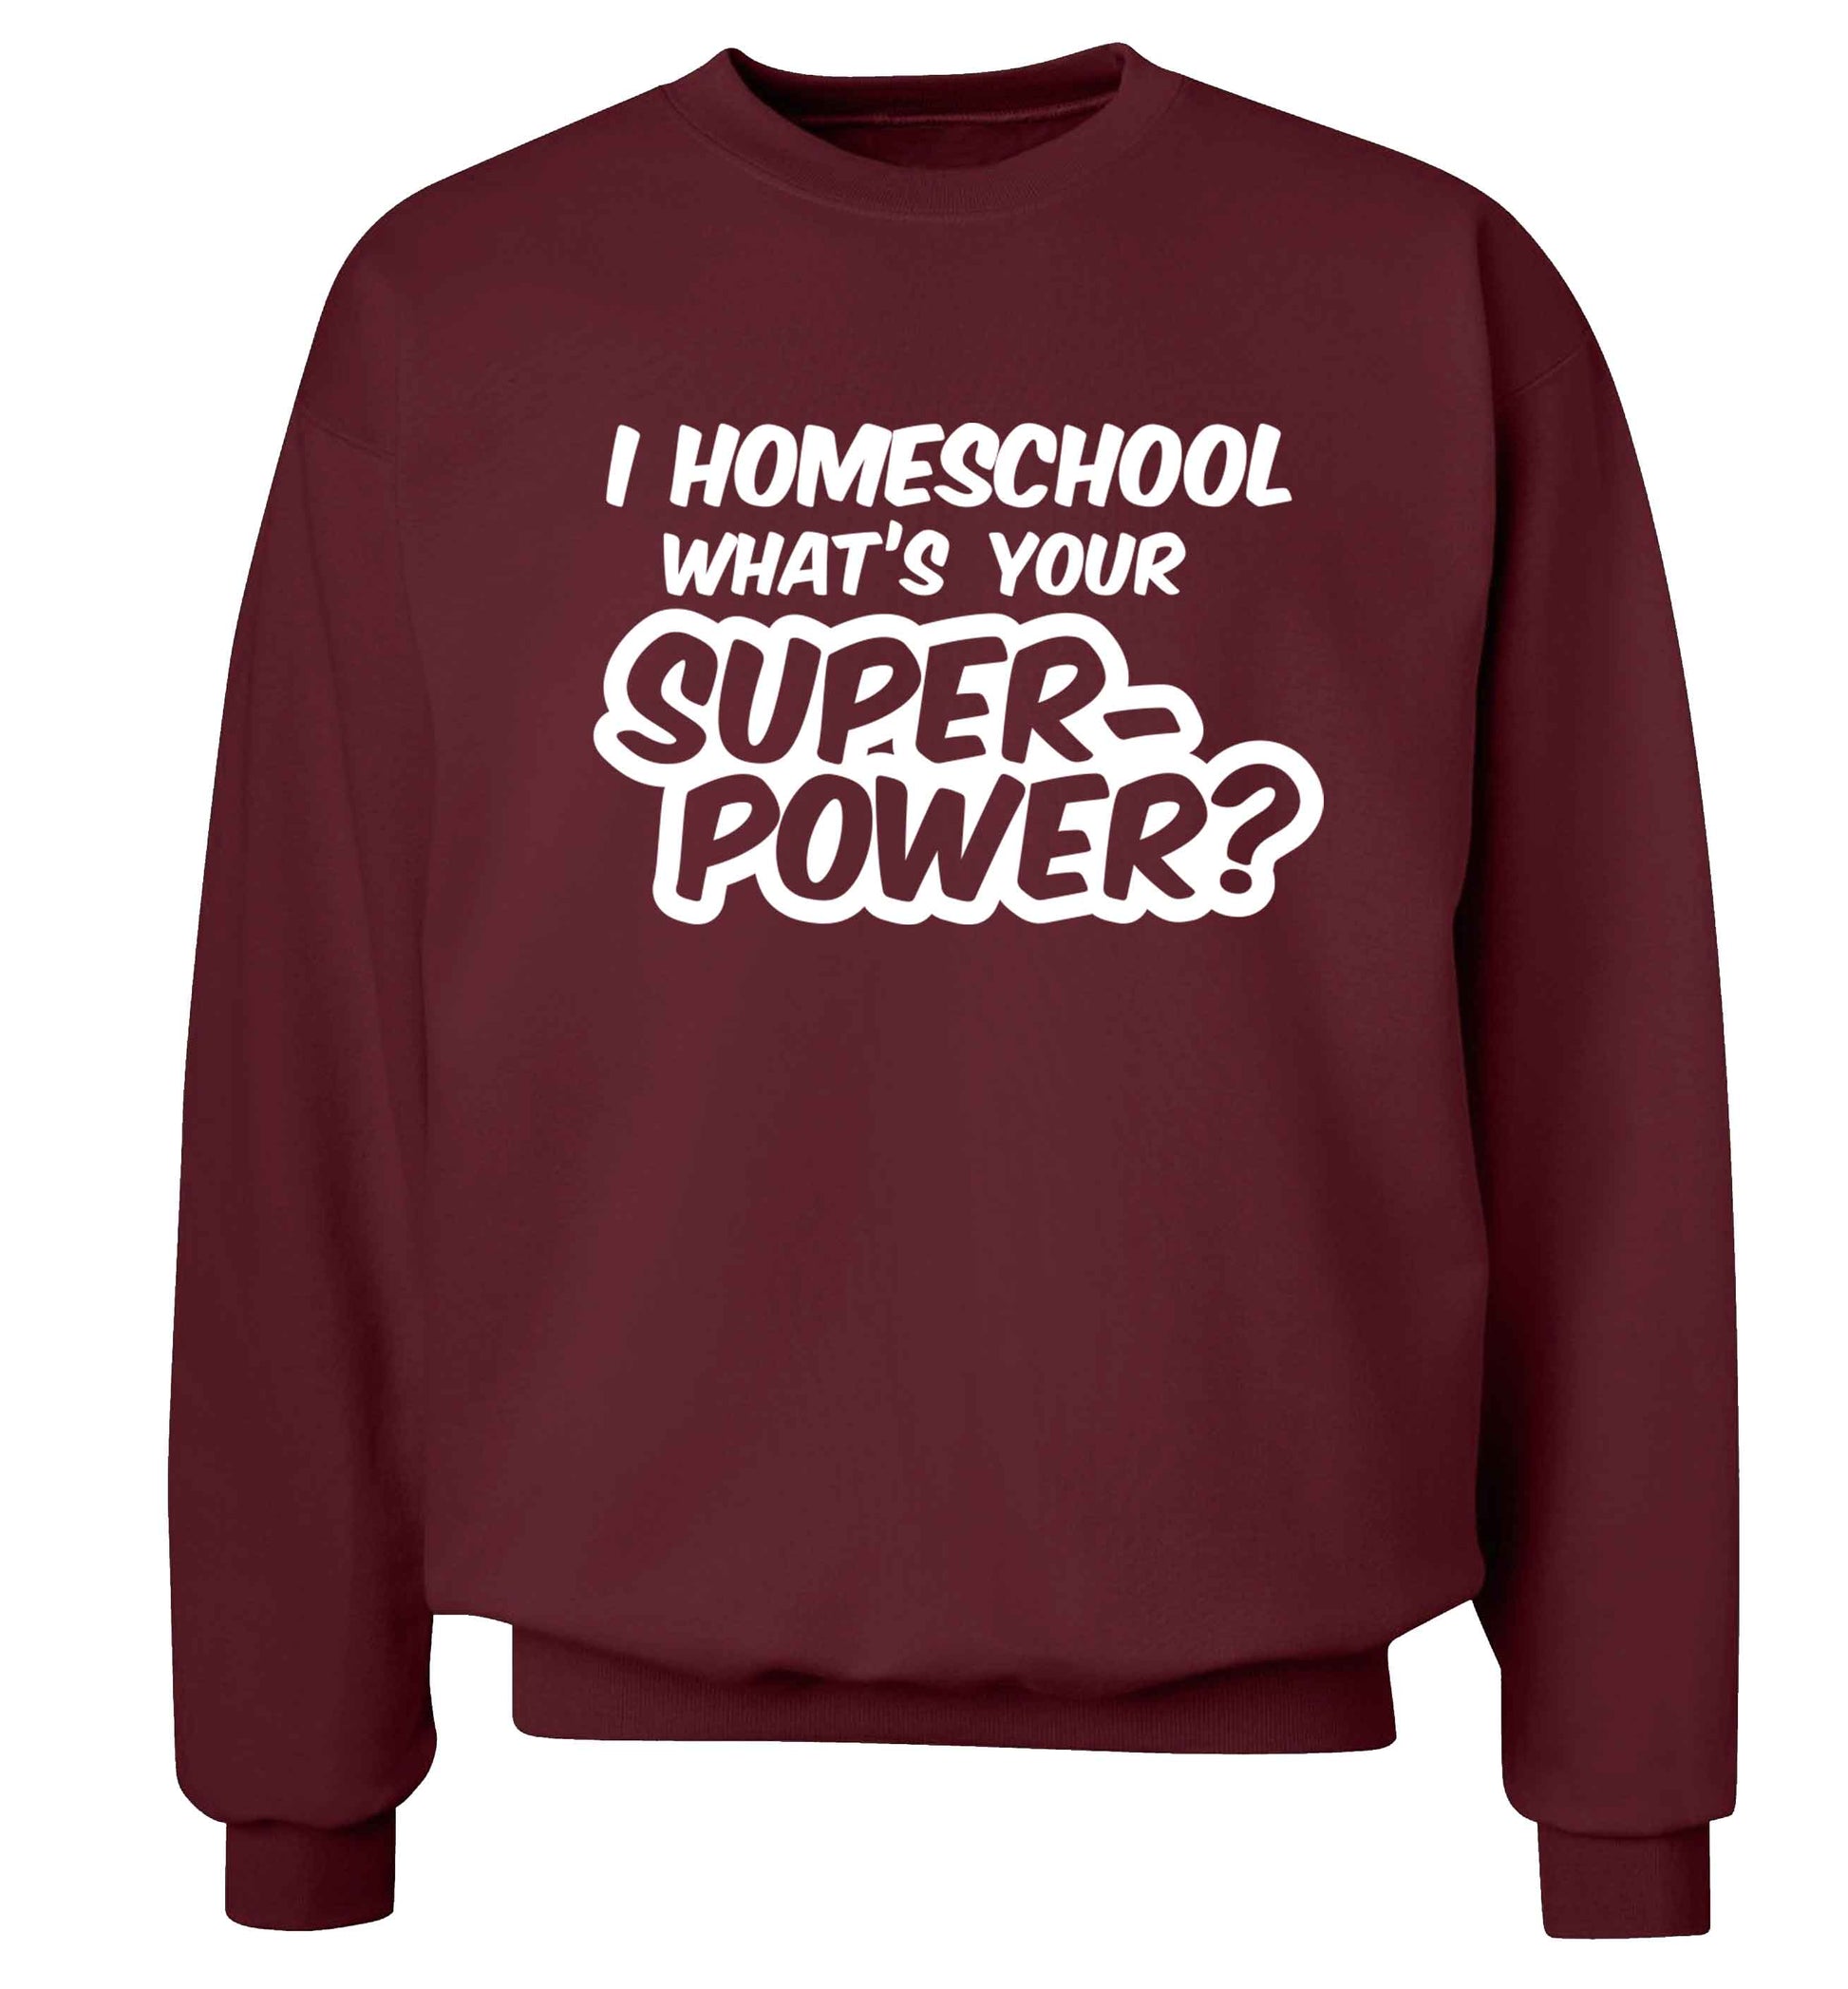 I homeschool what's your superpower? Adult's unisex maroon Sweater 2XL